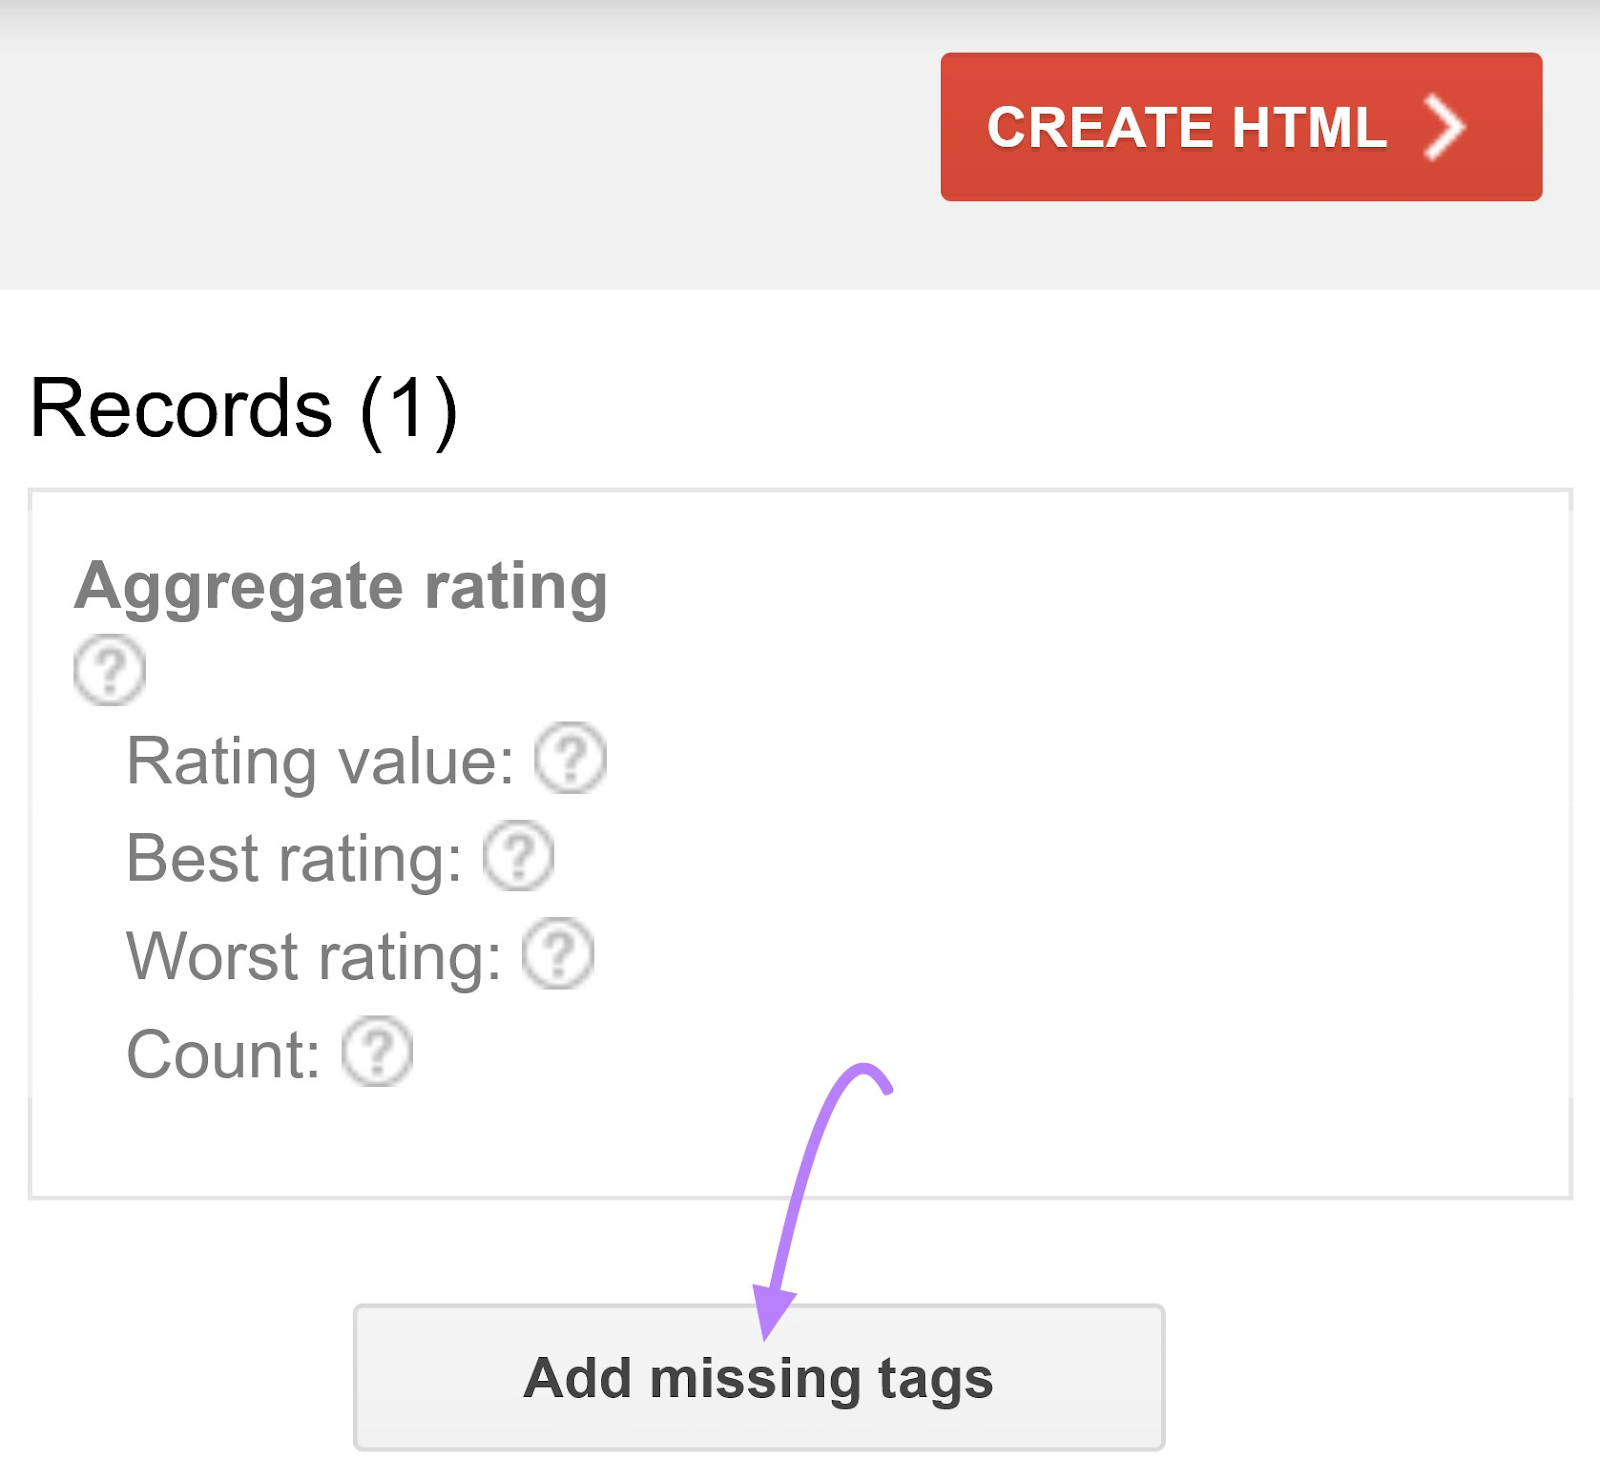 where to find “Add missing tags” button